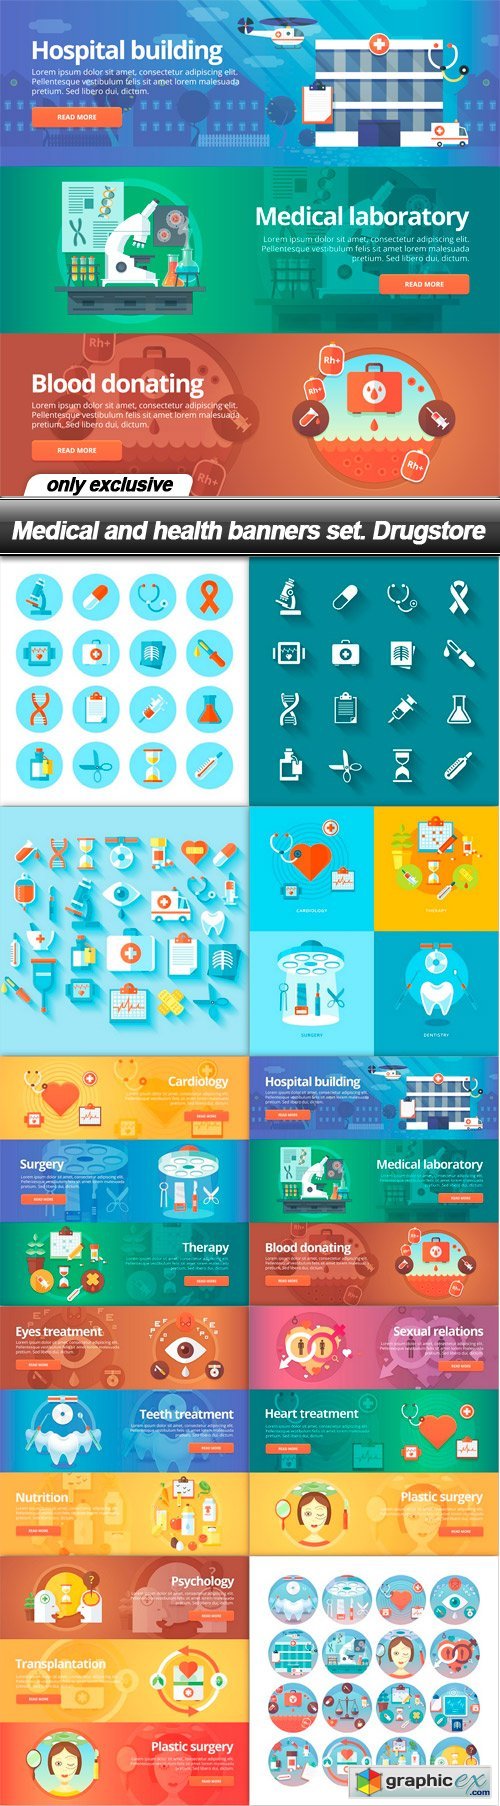 Medical and health banners set. Drugstore - 10 EPS